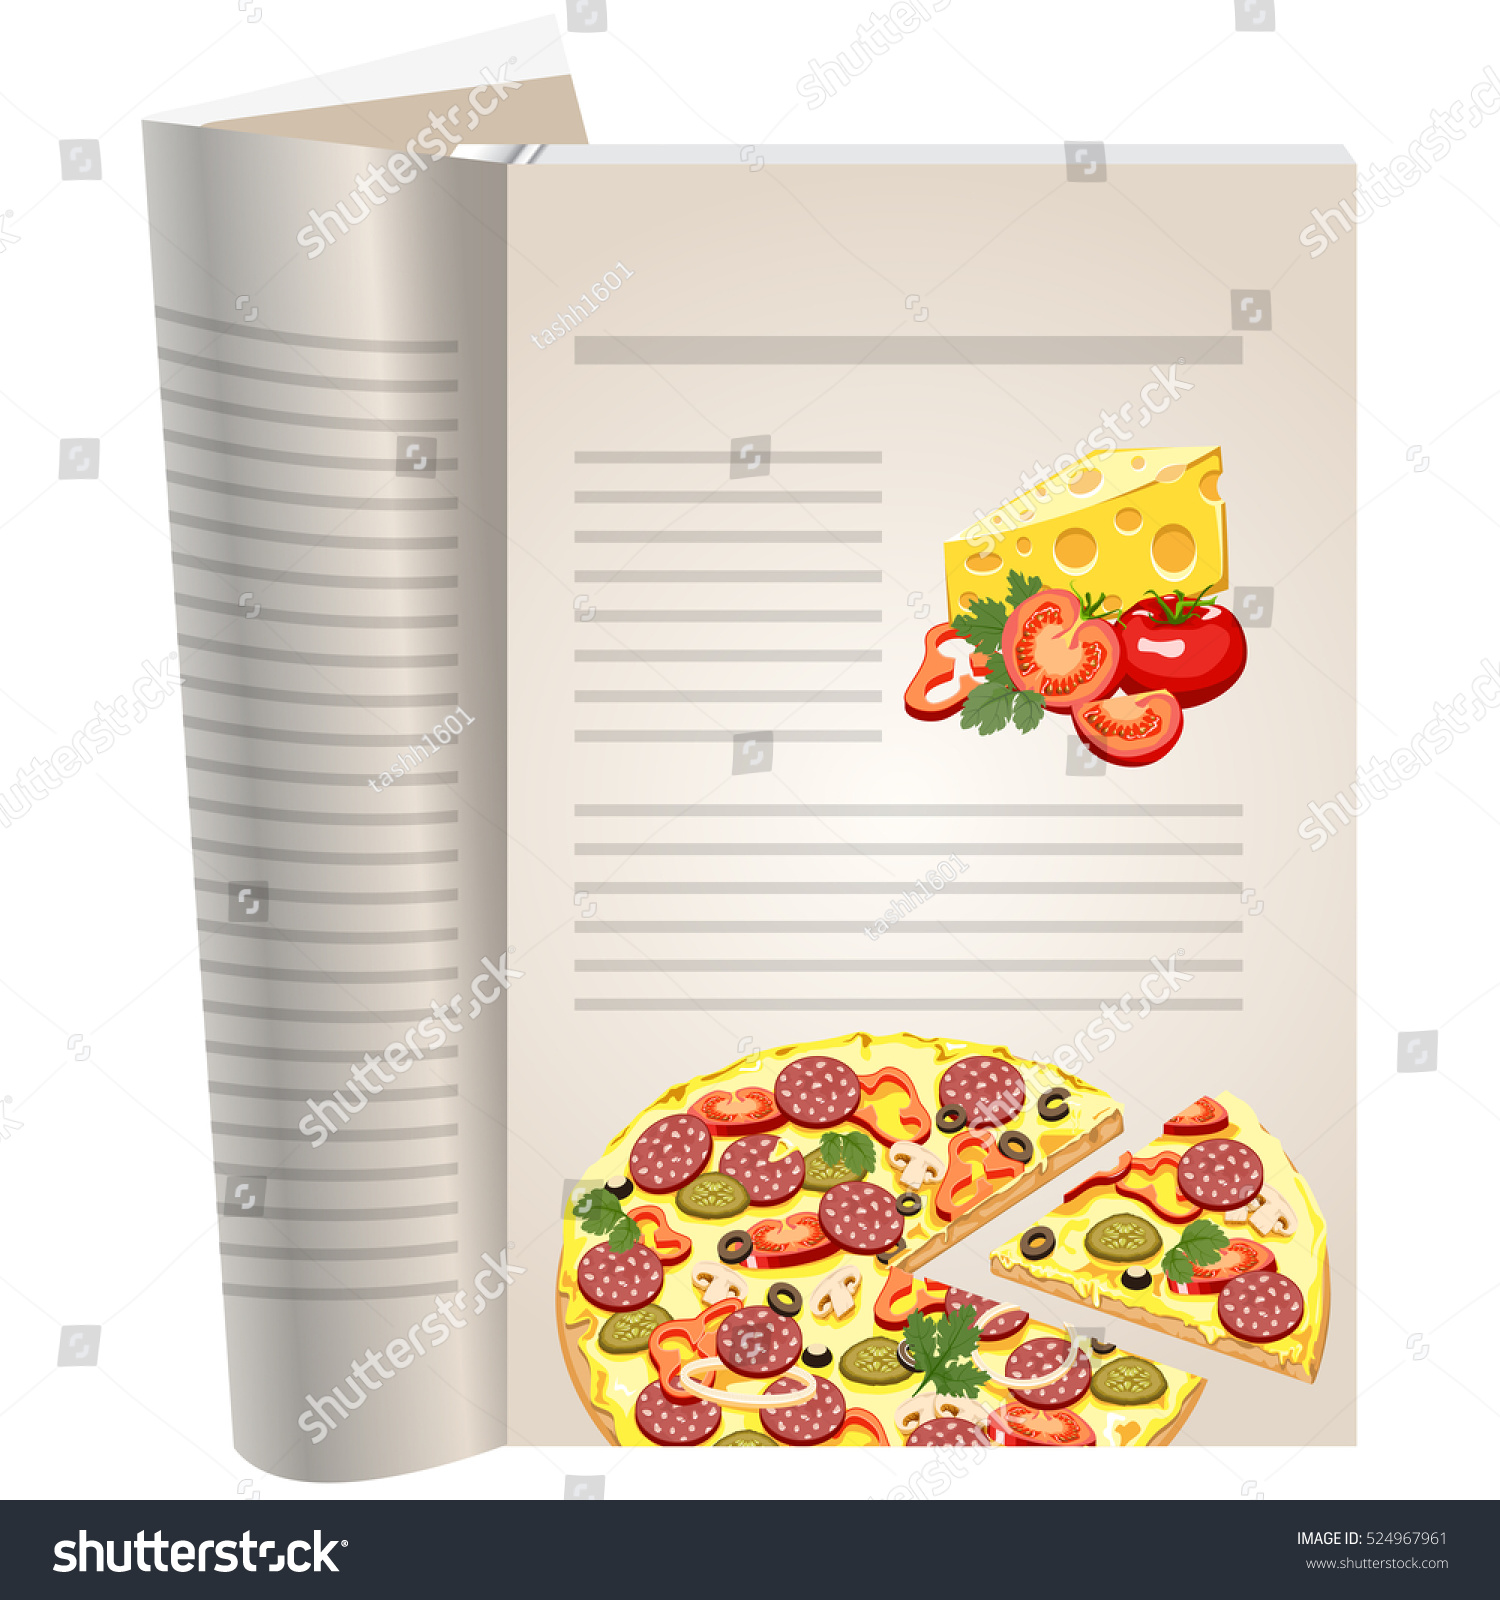 Recipe Template For Pages from image.shutterstock.com